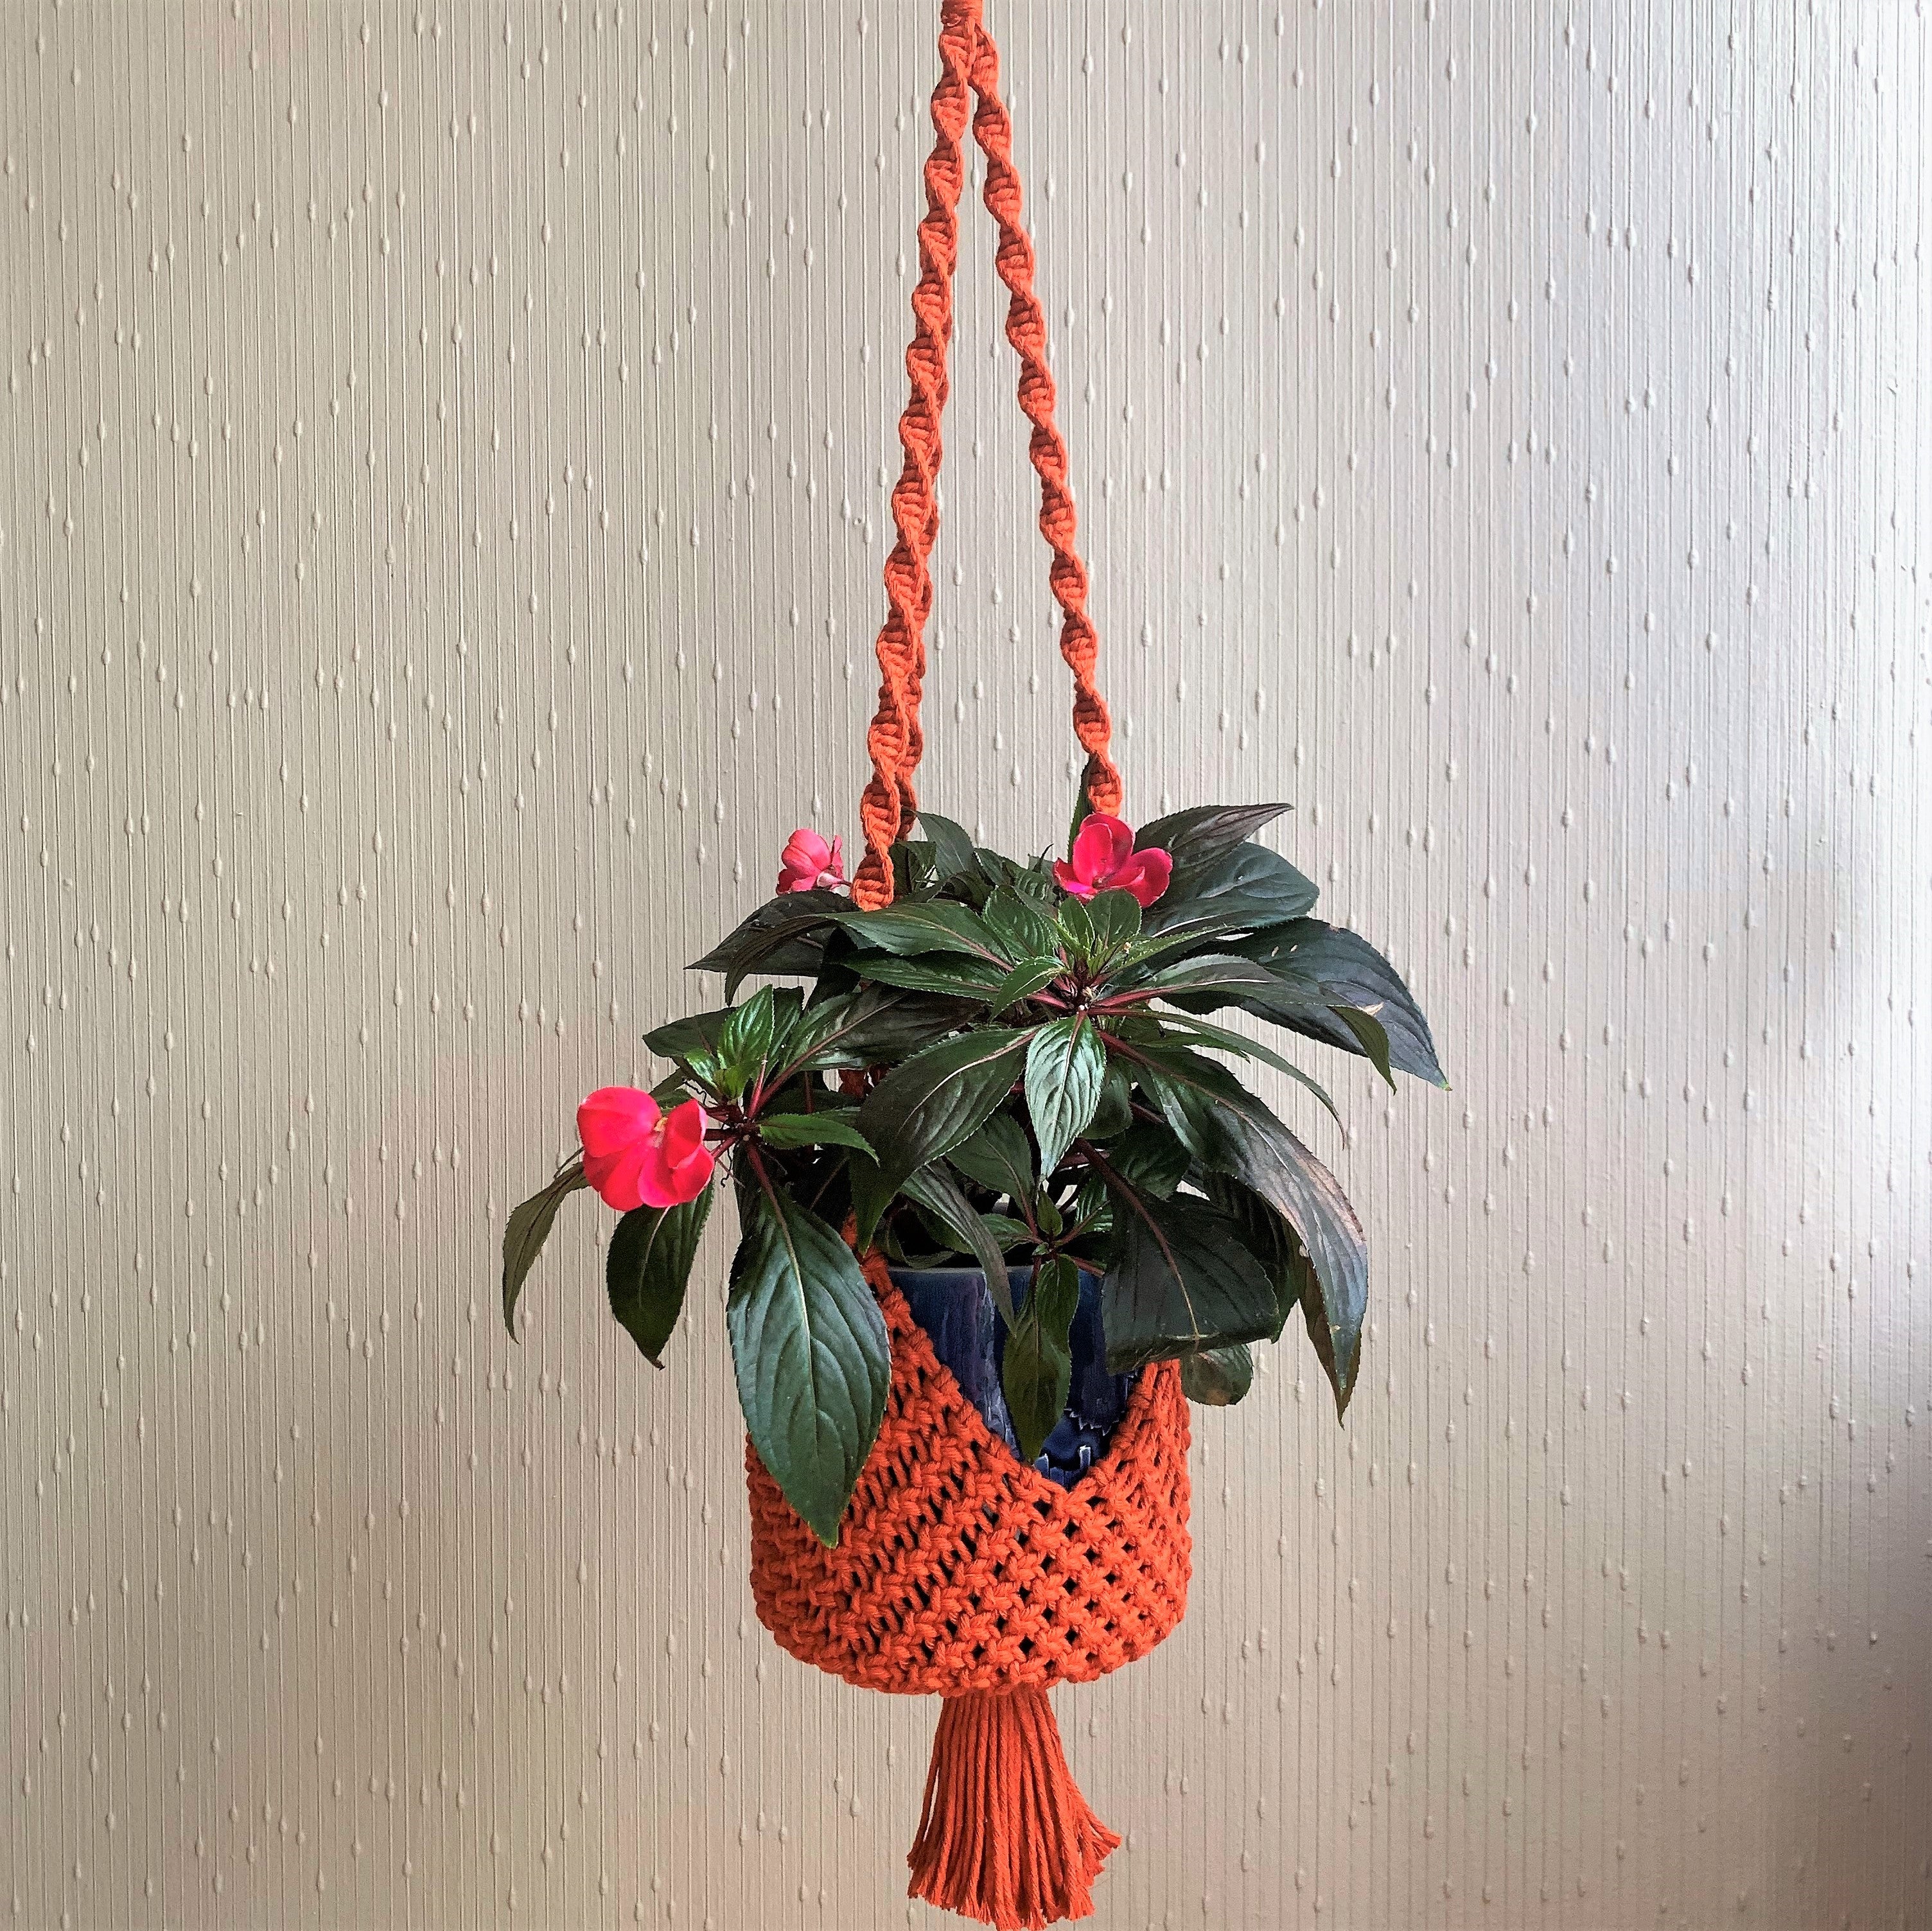 An orange basket-style macrame plant hanger with a houseplant in a blue planter hanging from the ceiling.